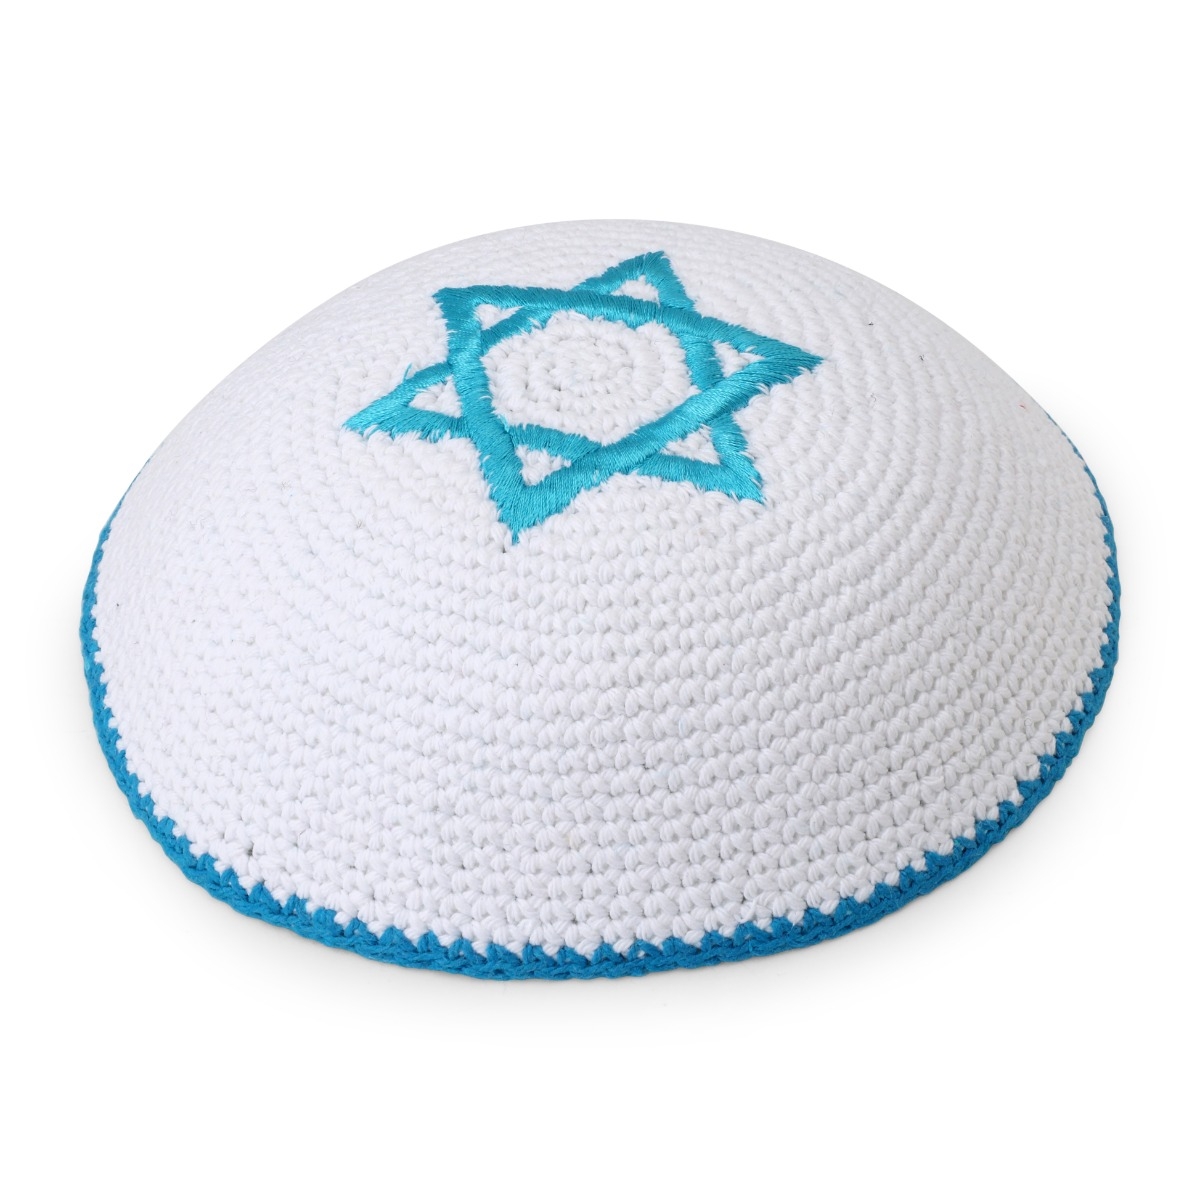 Knitted and Embroidered Star of David Kippah - Choice of Color - 1